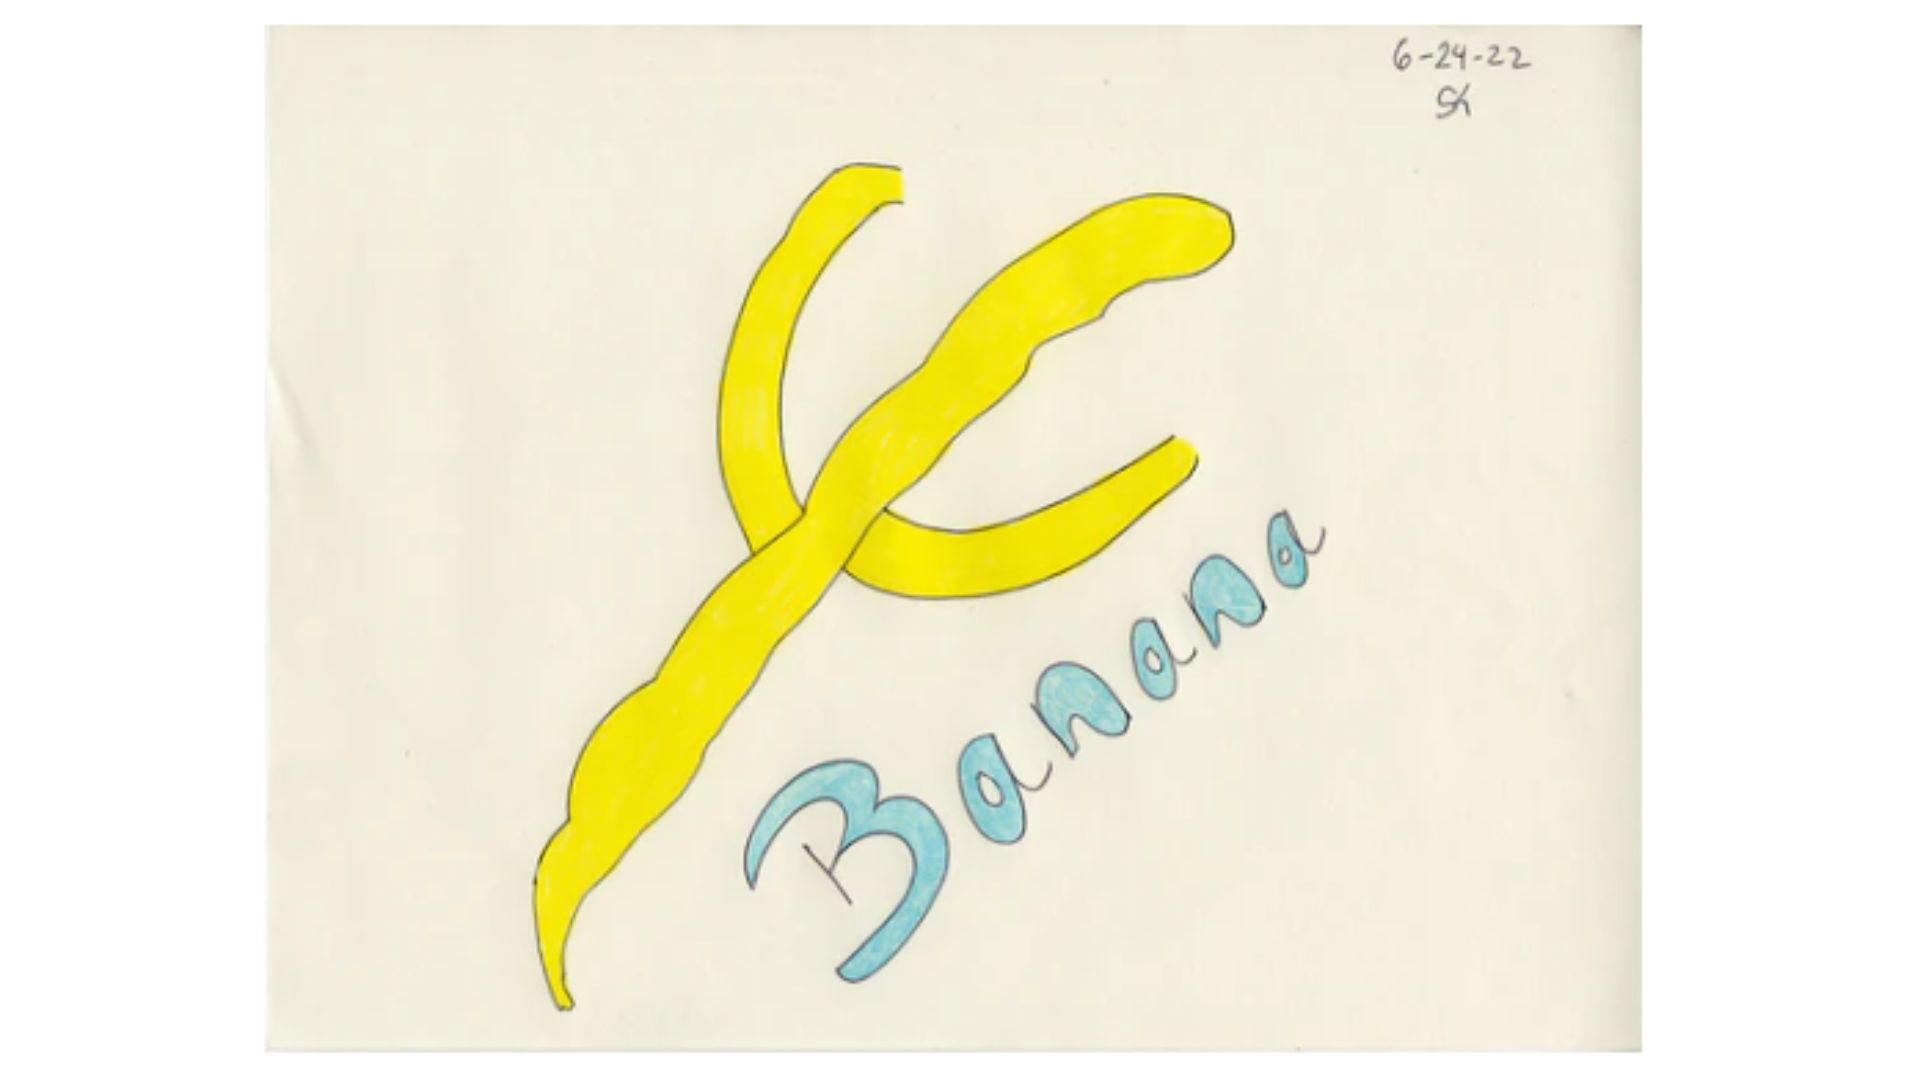 a drawing of a banana labeled "banana" in blue handrawn lettters.